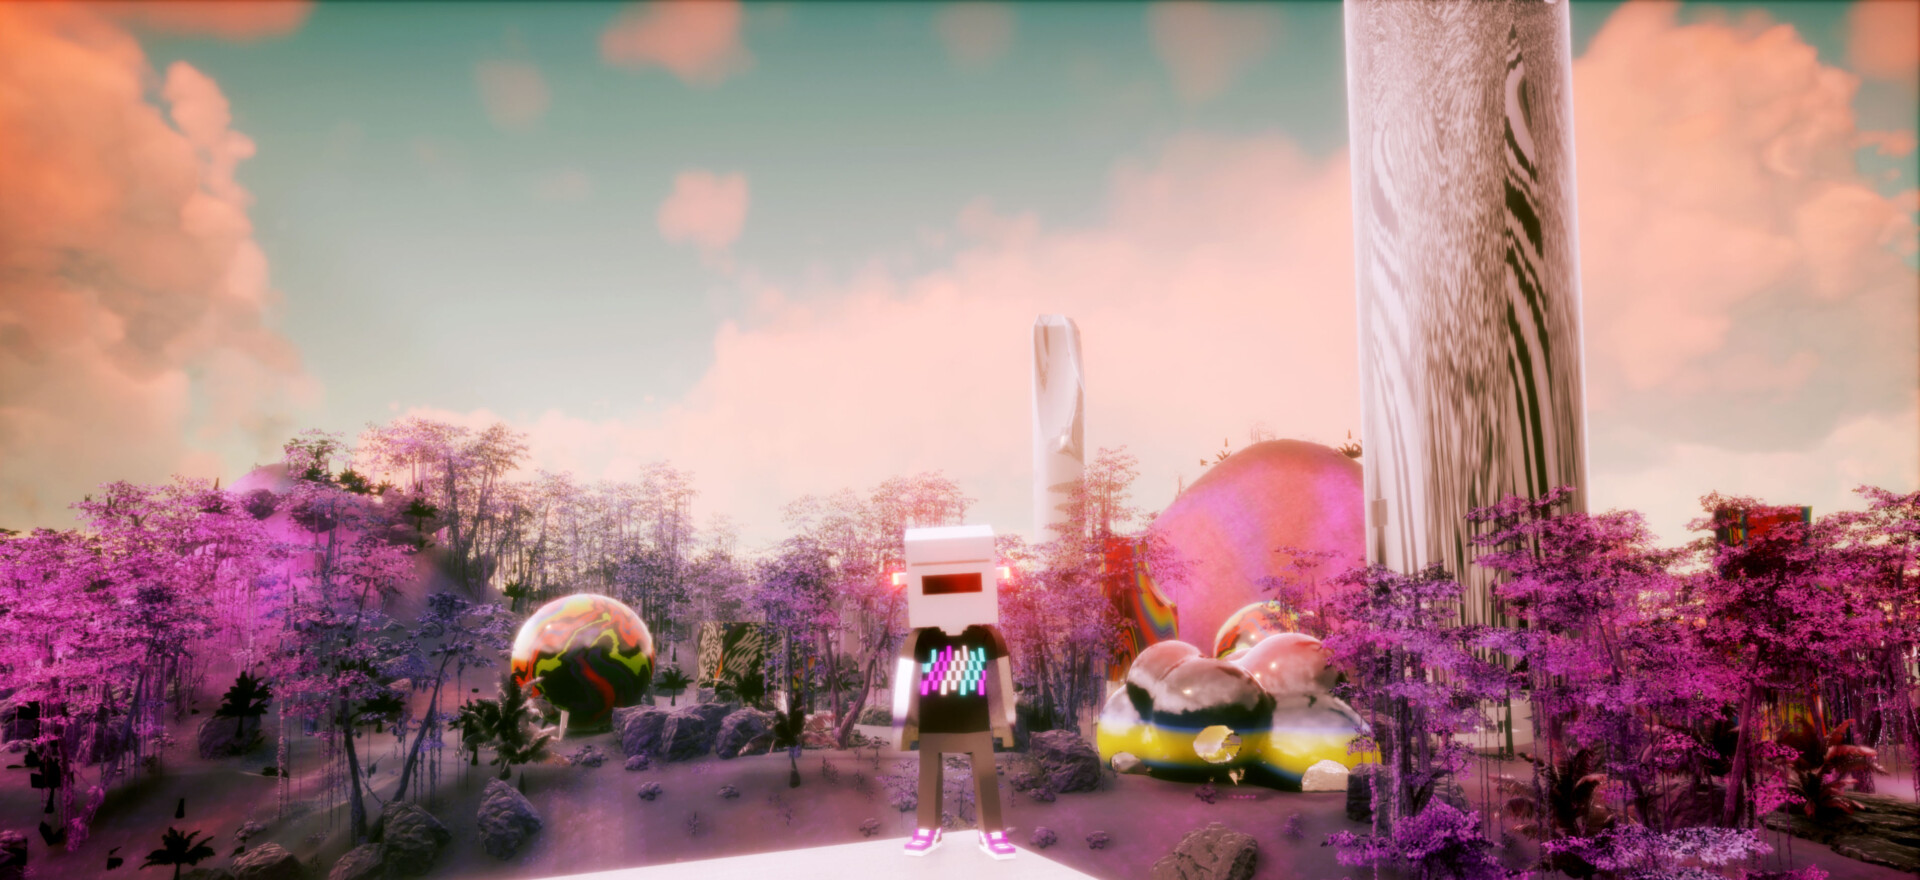 A view of a virtual world, showing a cube-headed figure looking up at a pale rising column amid purple shrubbery